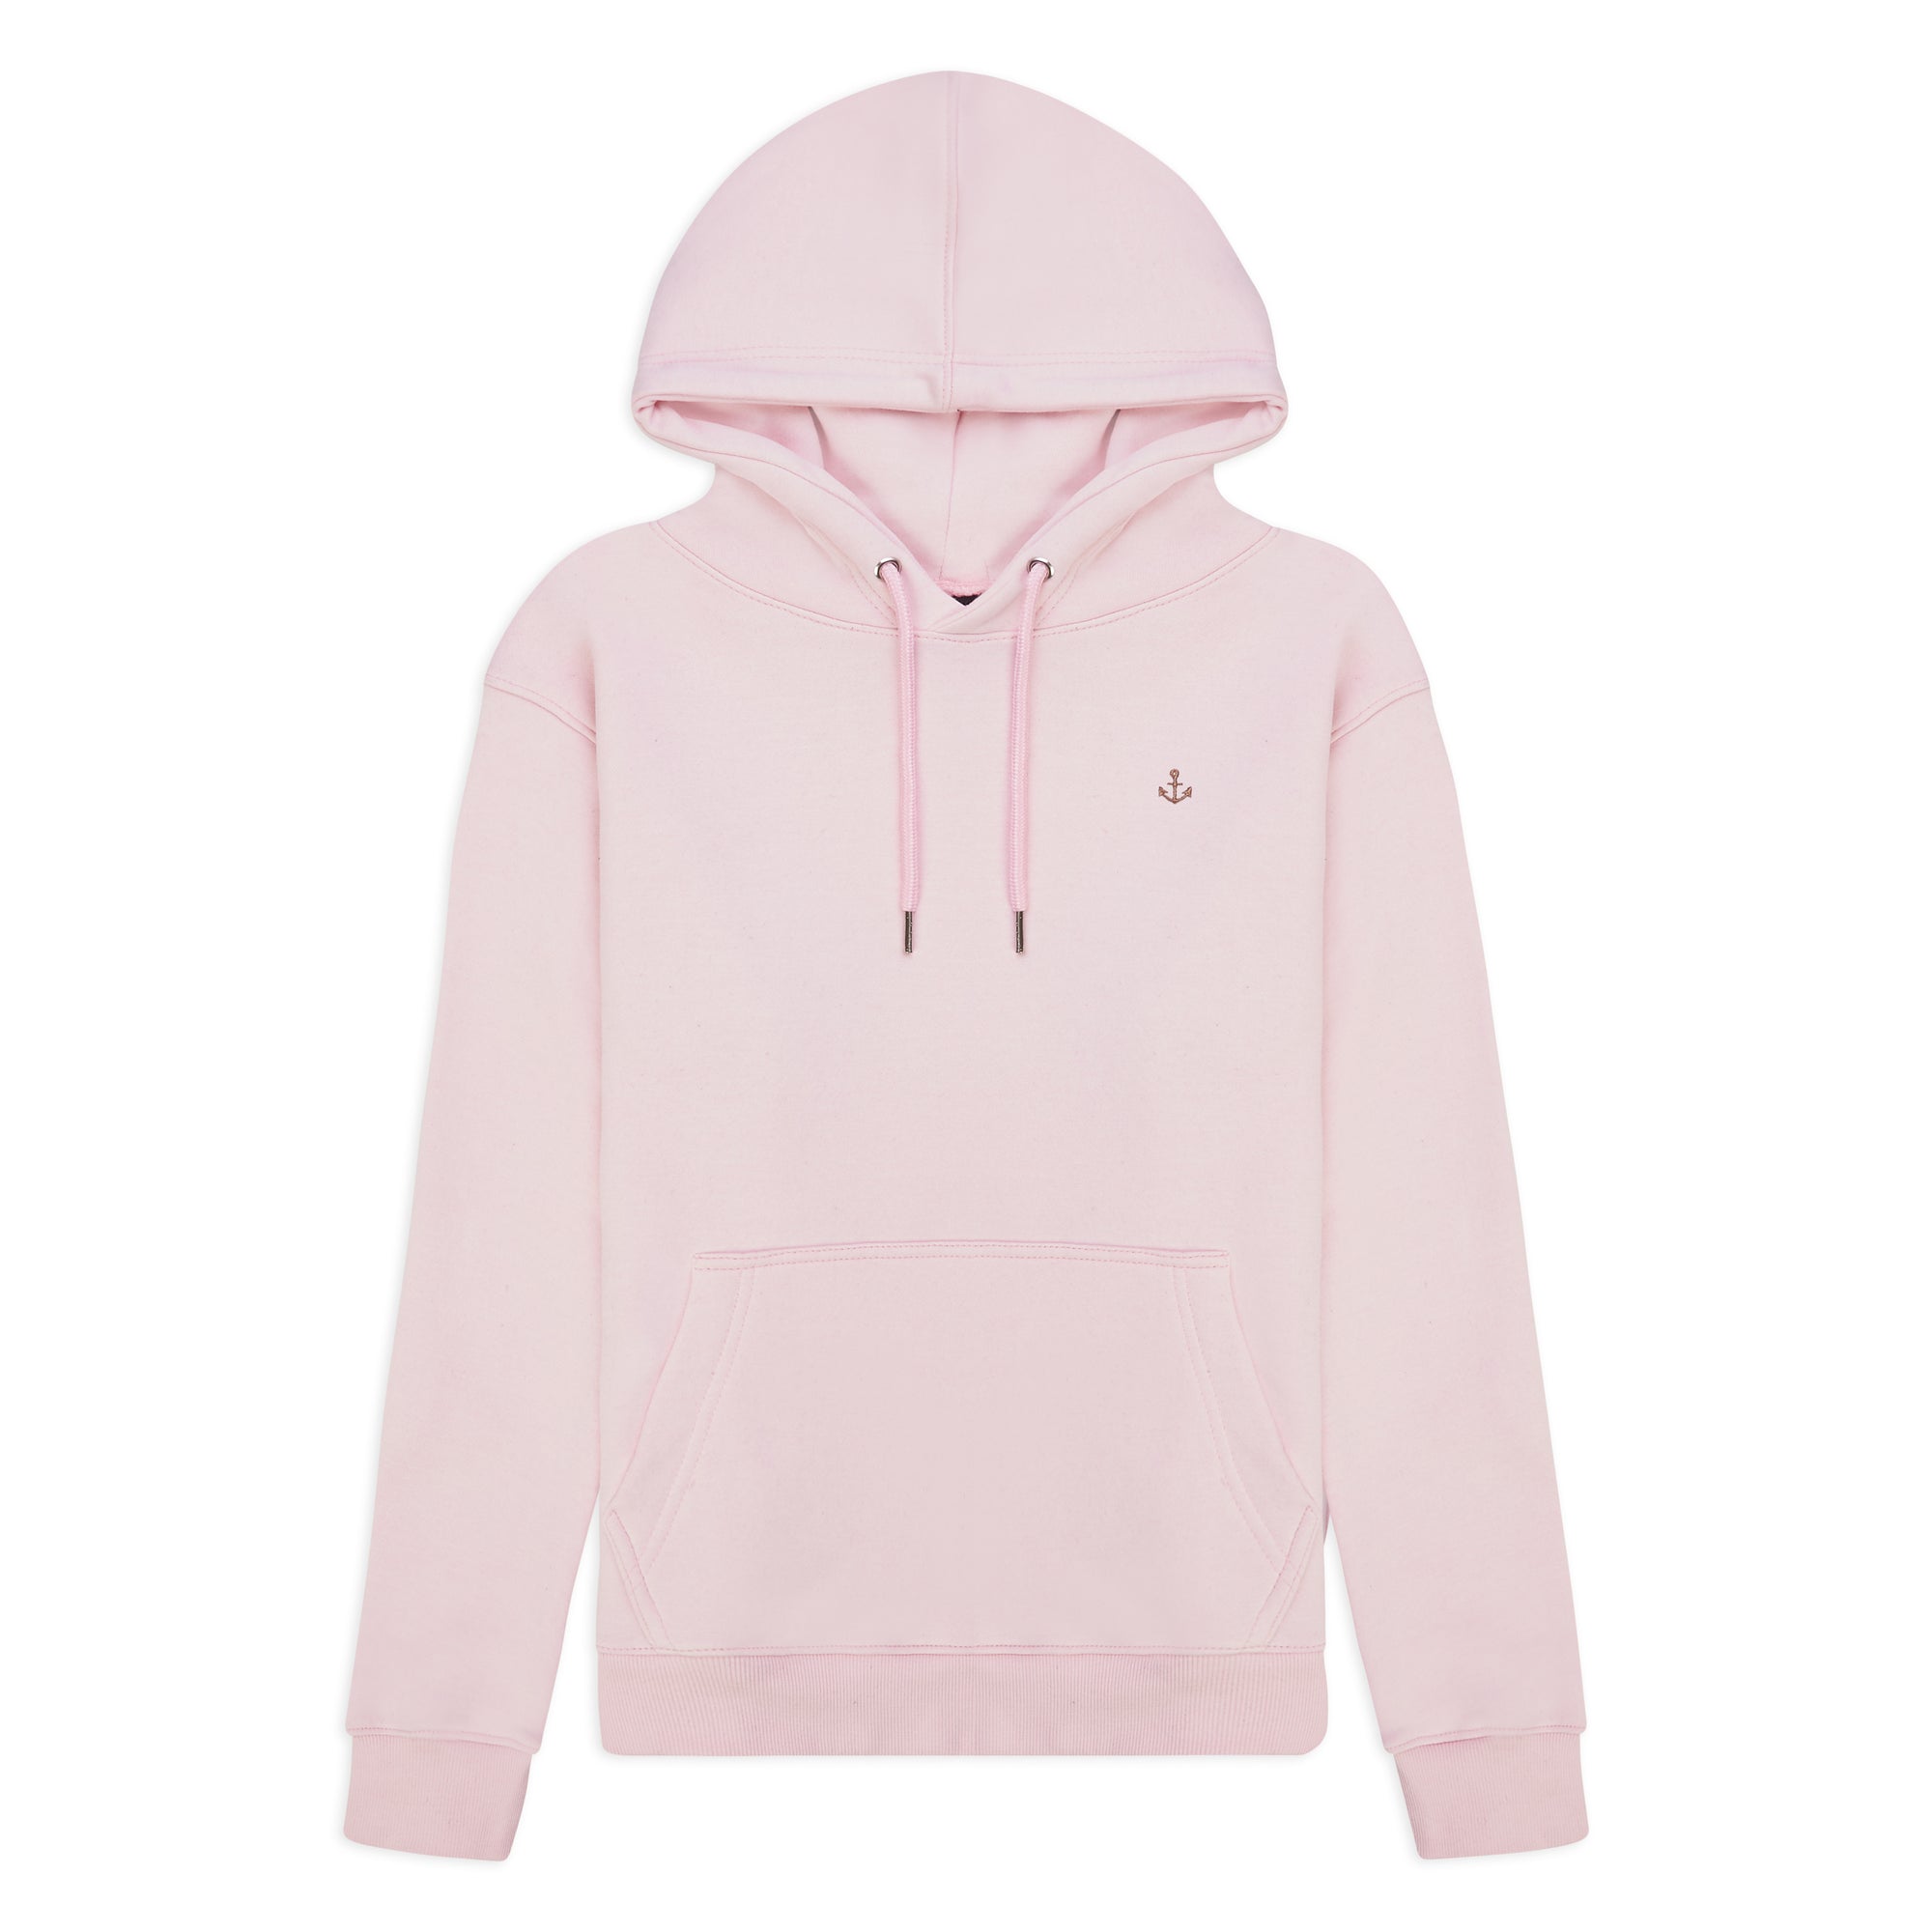 FORCE 10 OFFICIAL ⚓️ PORT SIDE HOODY - PINK